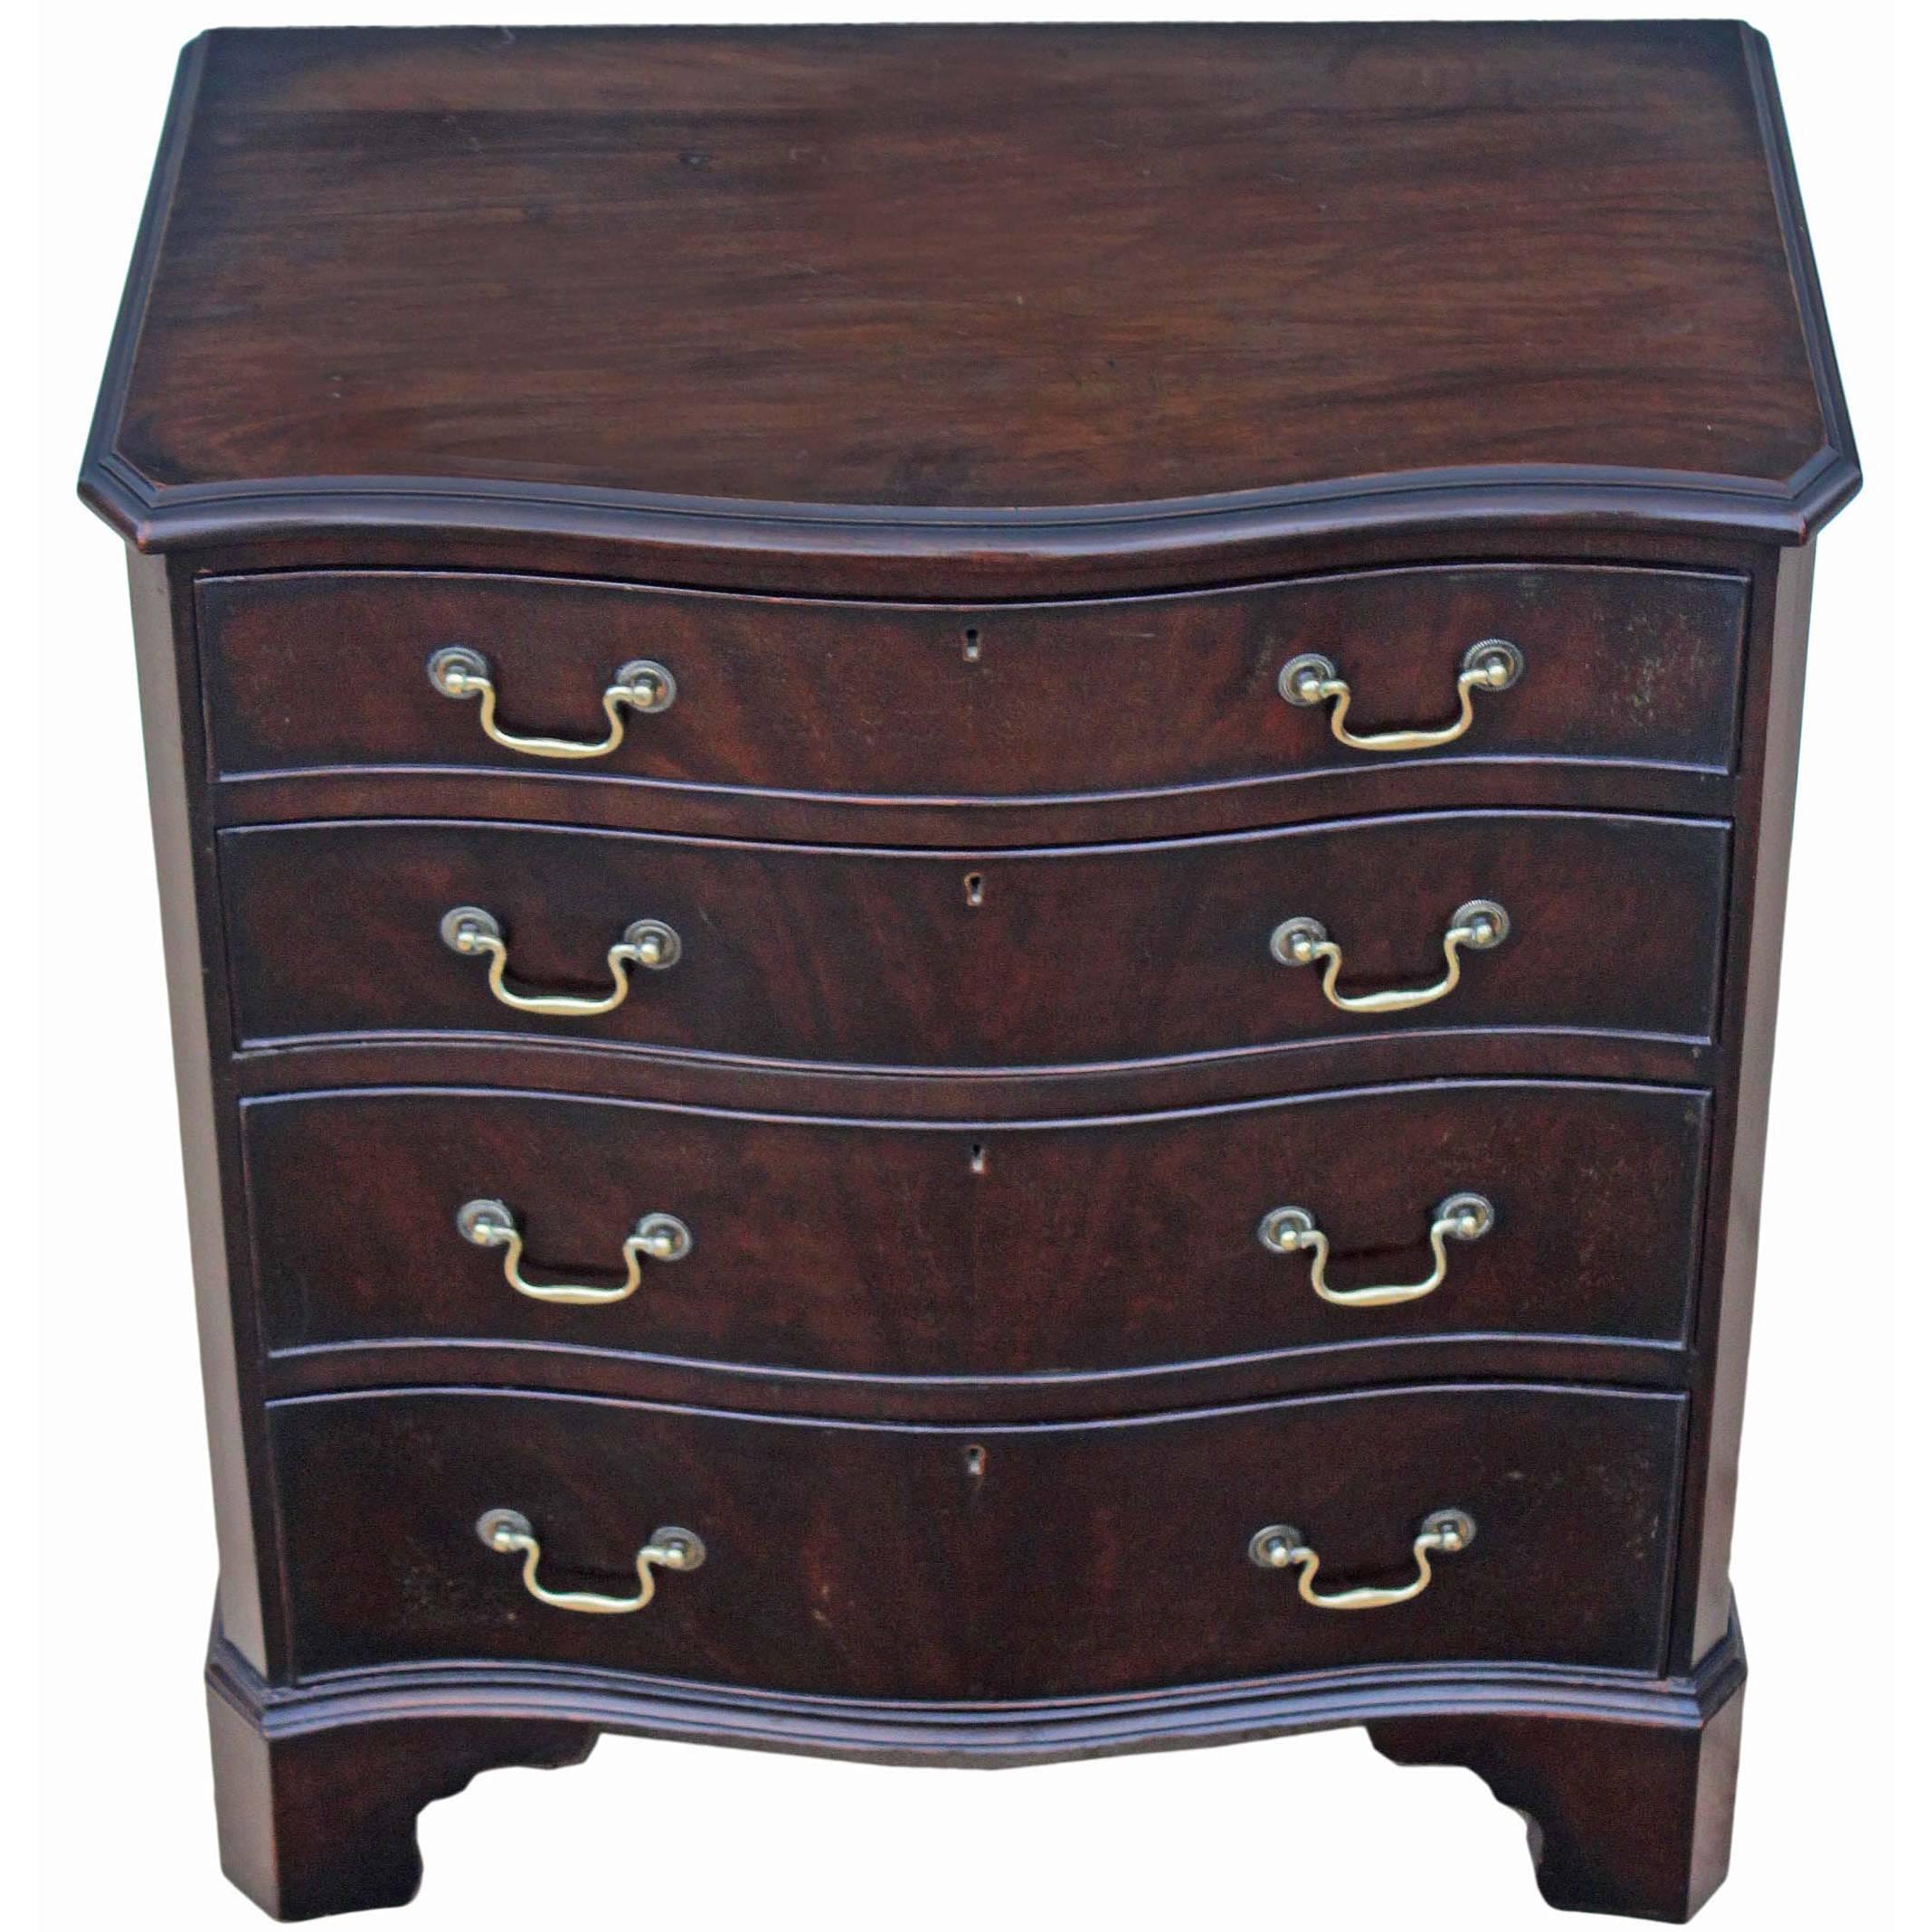 Antique Quality Georgian Revival Small Mahogany Serpentine Chest of Drawers For Sale